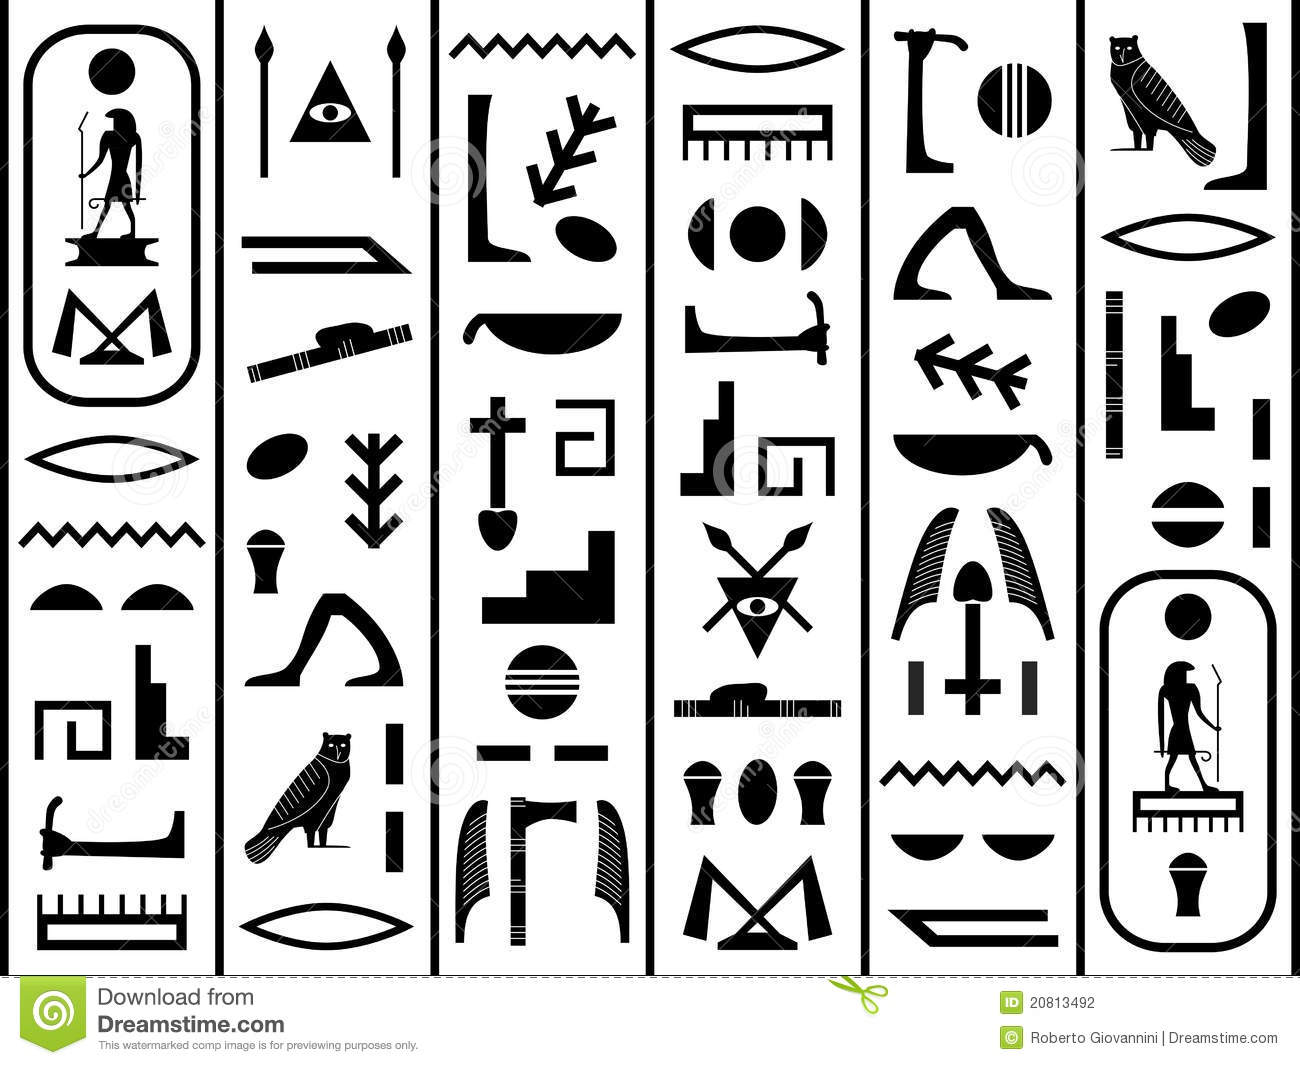 Hieroglyphics Wallpapers Man Made Hq Hieroglyphics Pictures 4k Images, Photos, Reviews